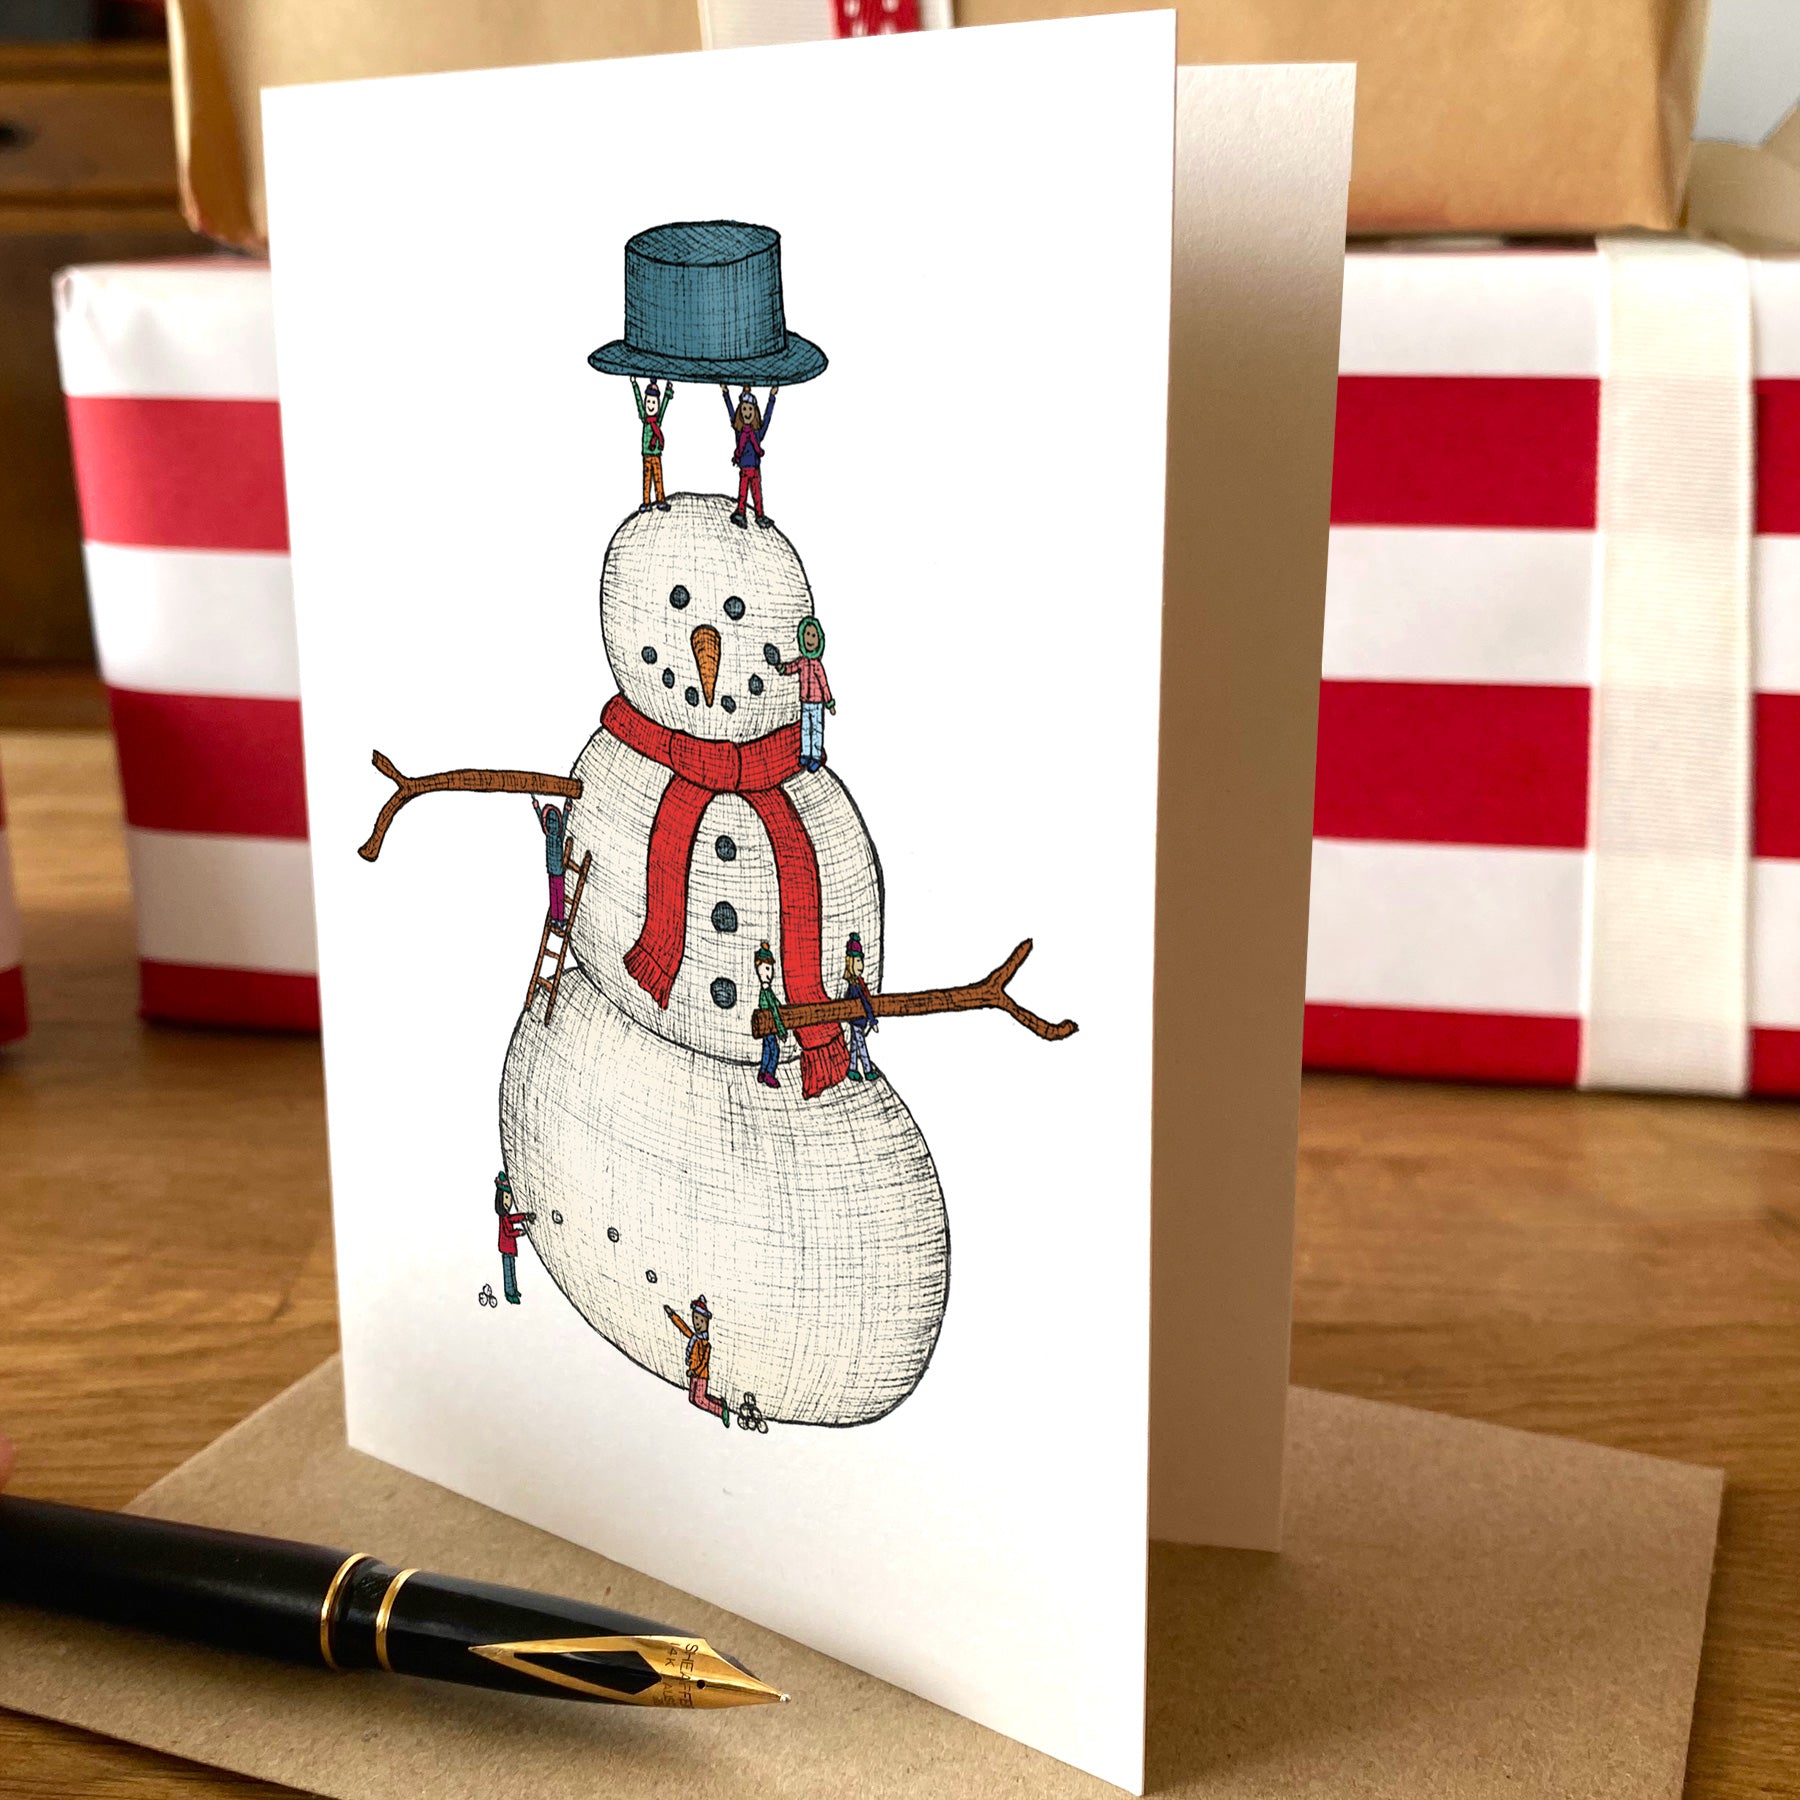 Ideas on how to display your handmade Christmas cards